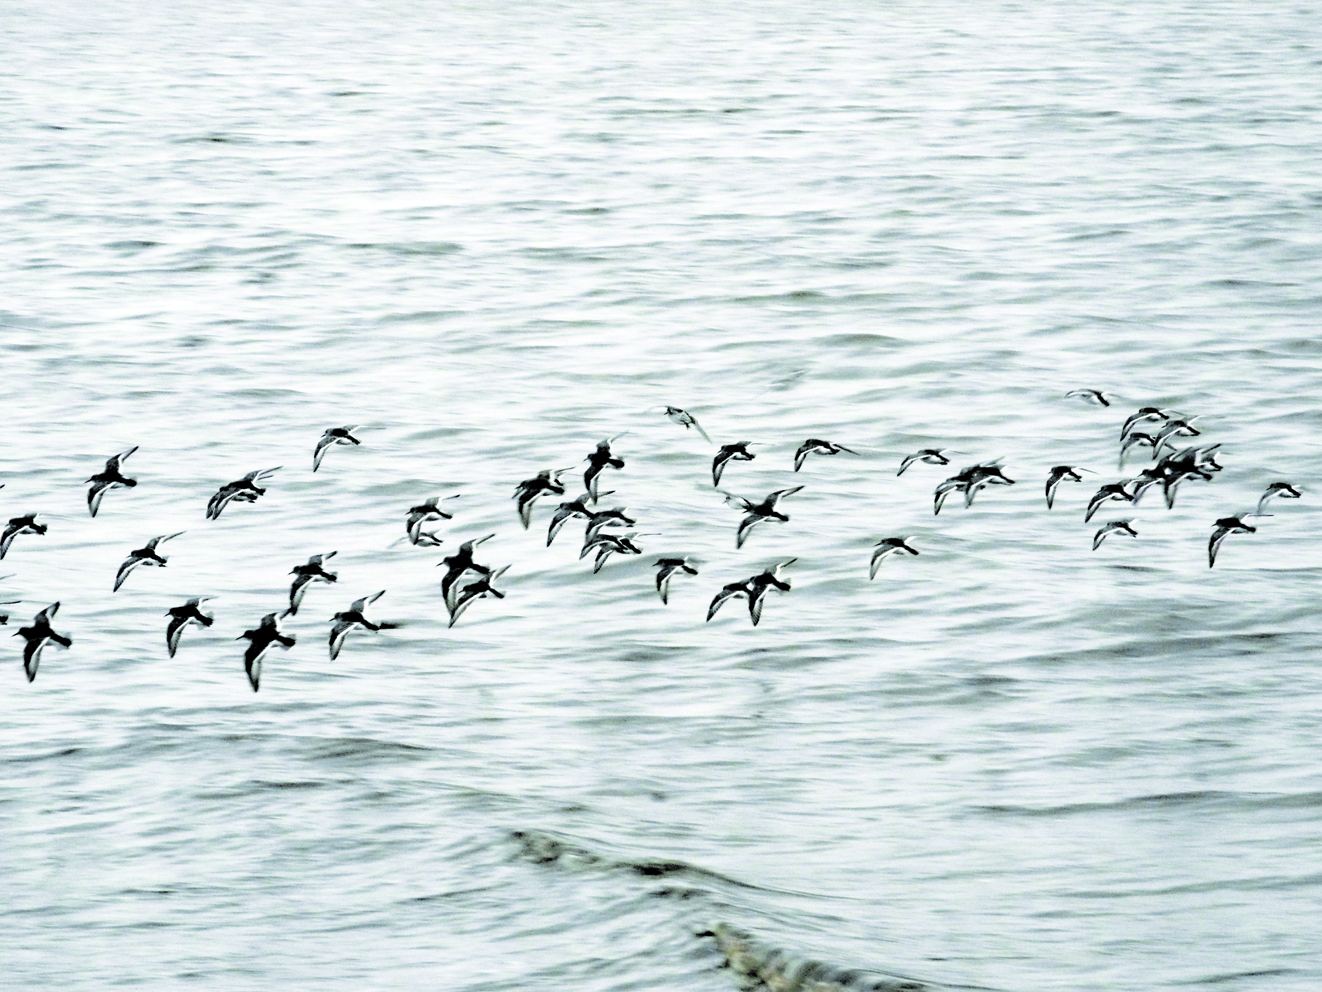 A flock of rock sandpipers flies over Mud Bay last Friday off the Homer Spit. Rock sandpipers winter in Kachemak Bay. Local birders reported seeing groups of up to 3,000 on the Spit last week.-Winging their way to spring